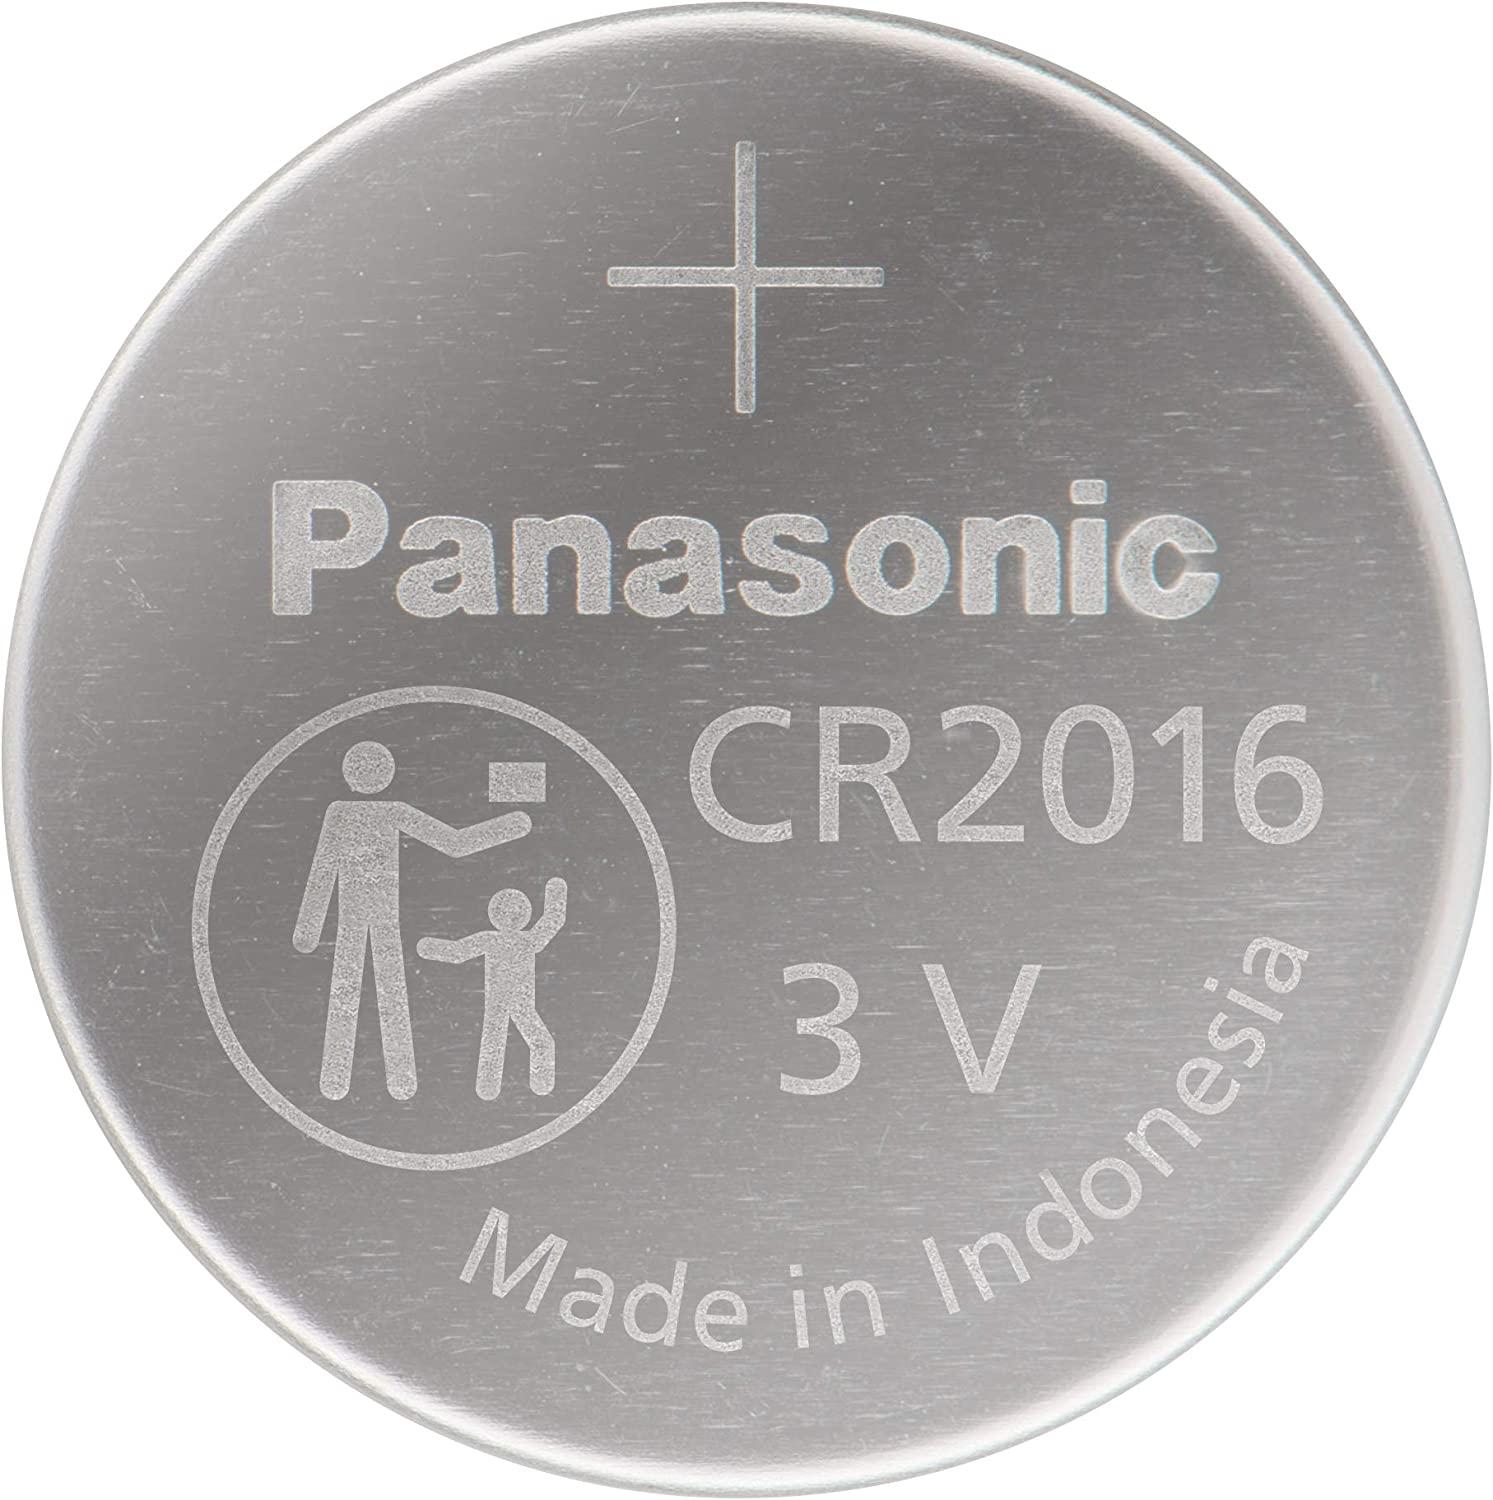 Panasonic CR2016 3.0 Volt Long Lasting Lithium Coin Cell Batteries in Child  Resistant, Standards Based Packaging, 4 Pack